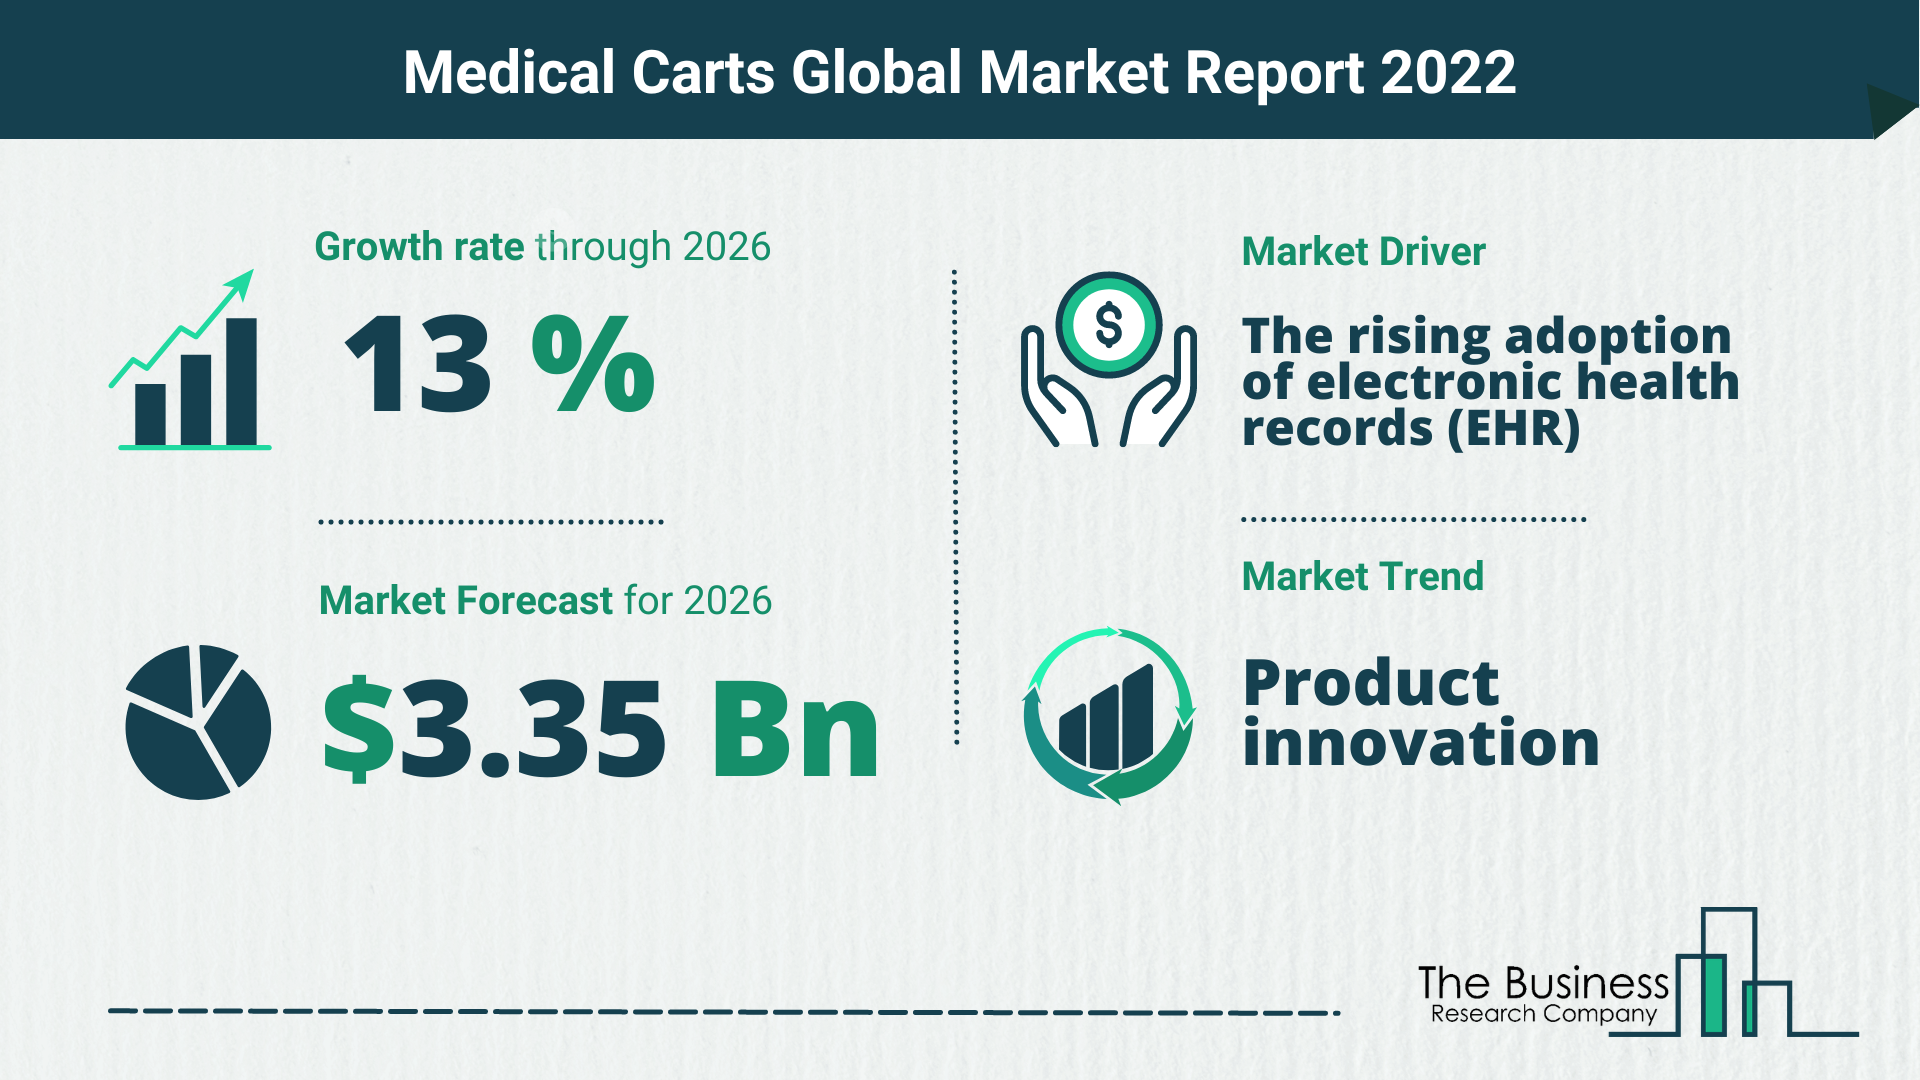 What Is The Medical Carts Market Overview In 2022?